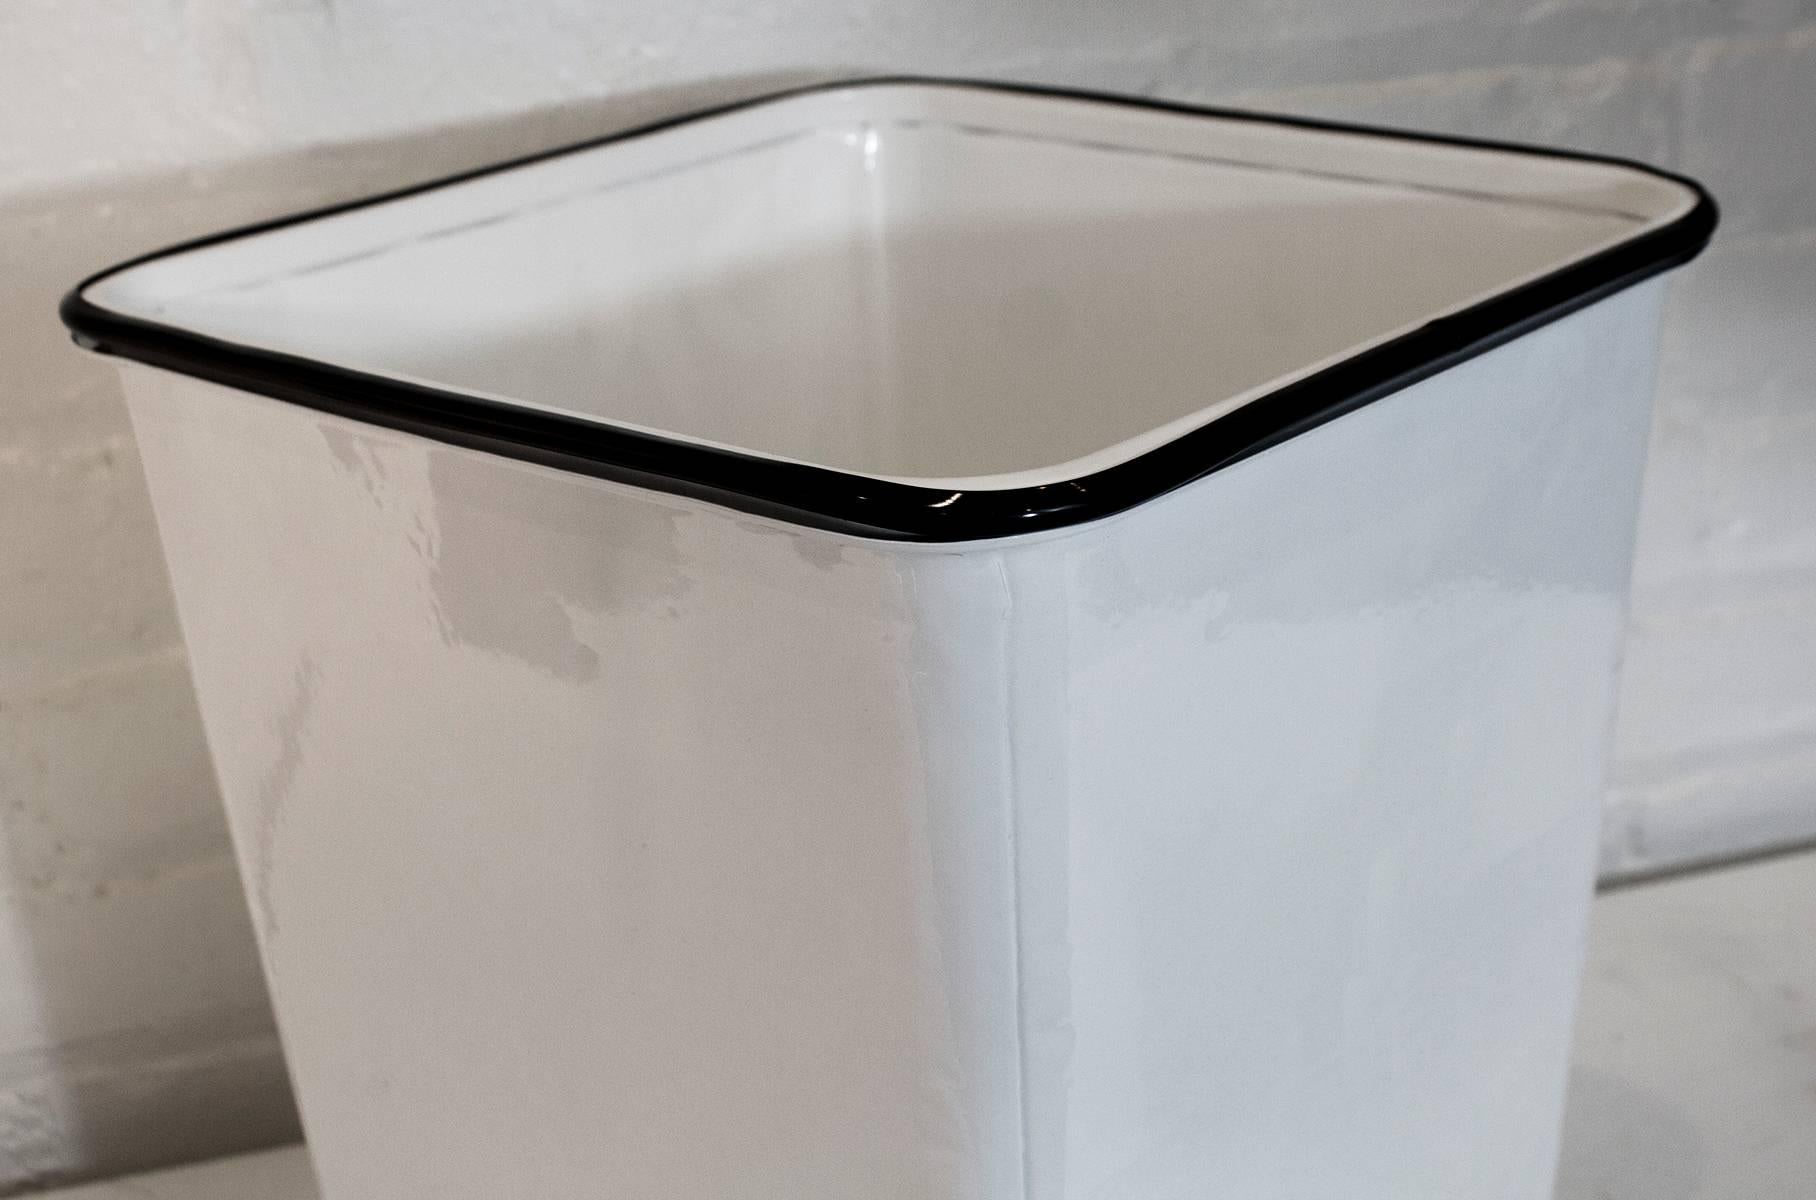 Great Machine Age square steel trash can refinished in gloss white powder coat finish. Perfect for the home, office, classroom or boardroom.
Several colors available. See other listings.

Dimensions: 13